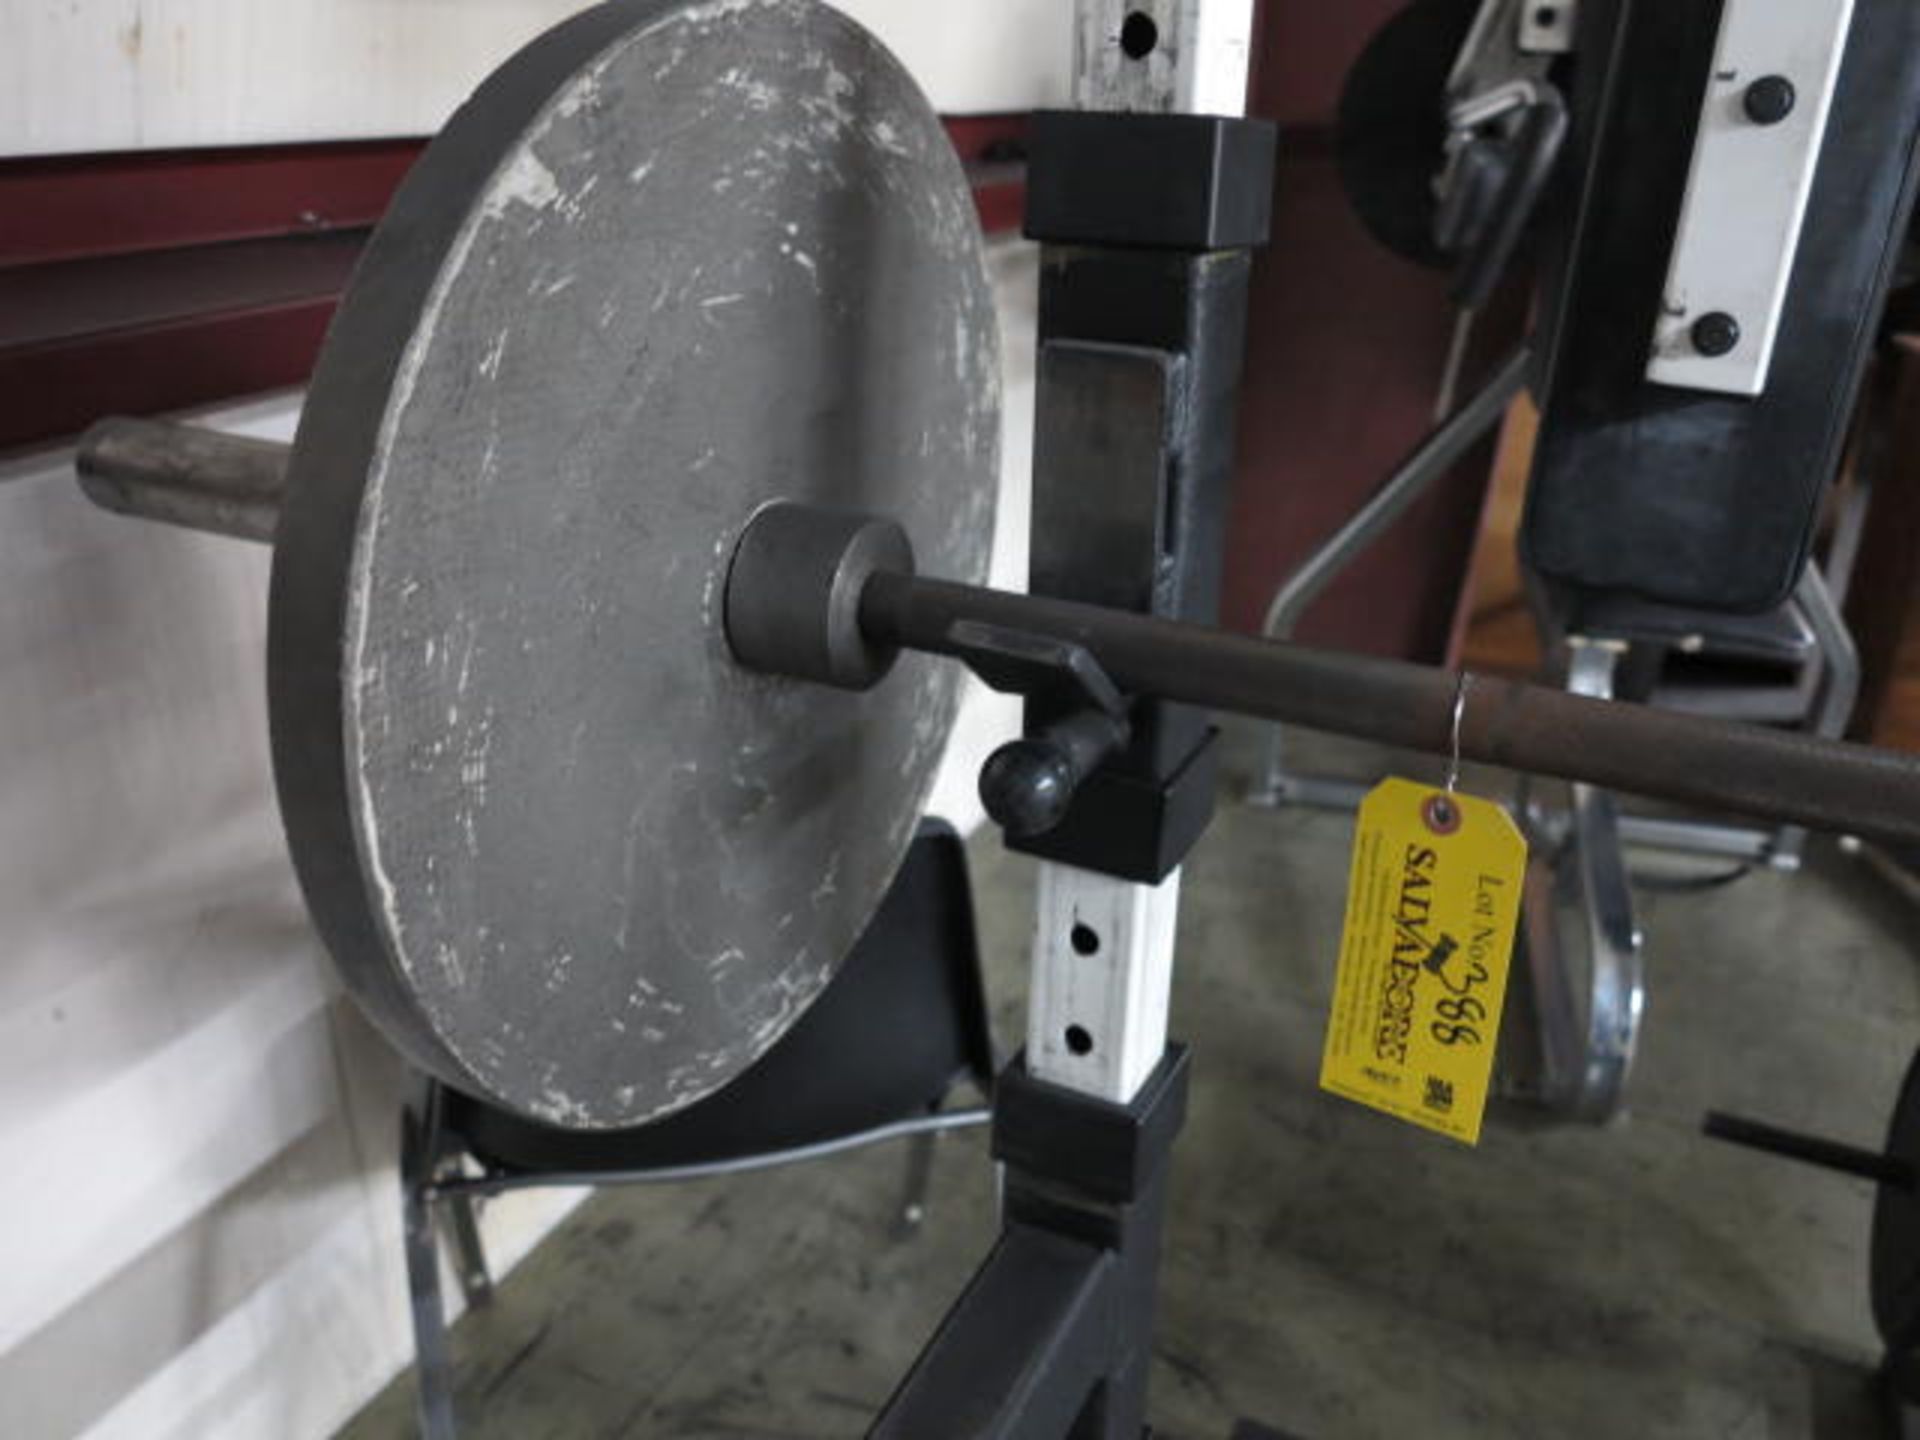 Olympic Bar & (2) Weights. Item is Located on Mezzanine